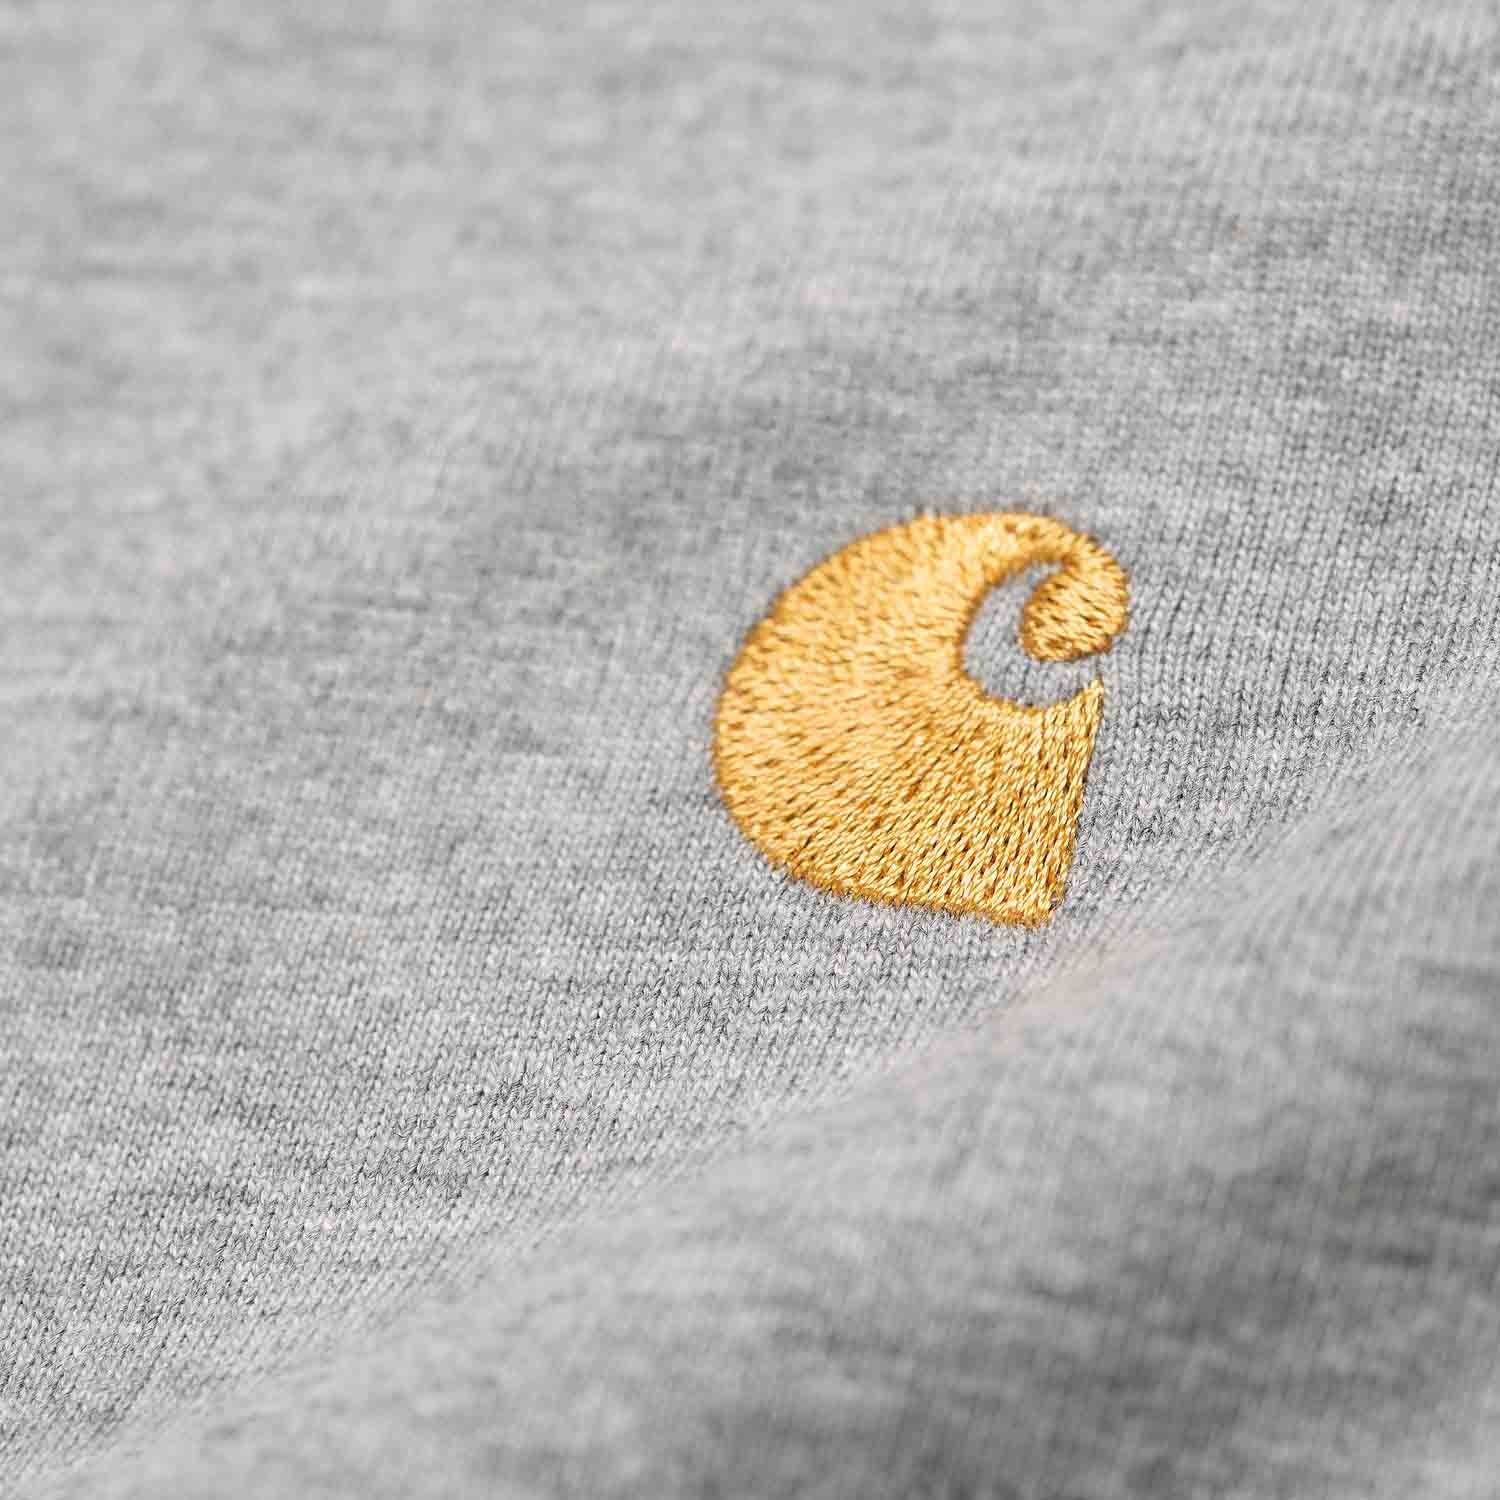 Carhartt WIP SS Chase T Shirt Grey Heather/Gold